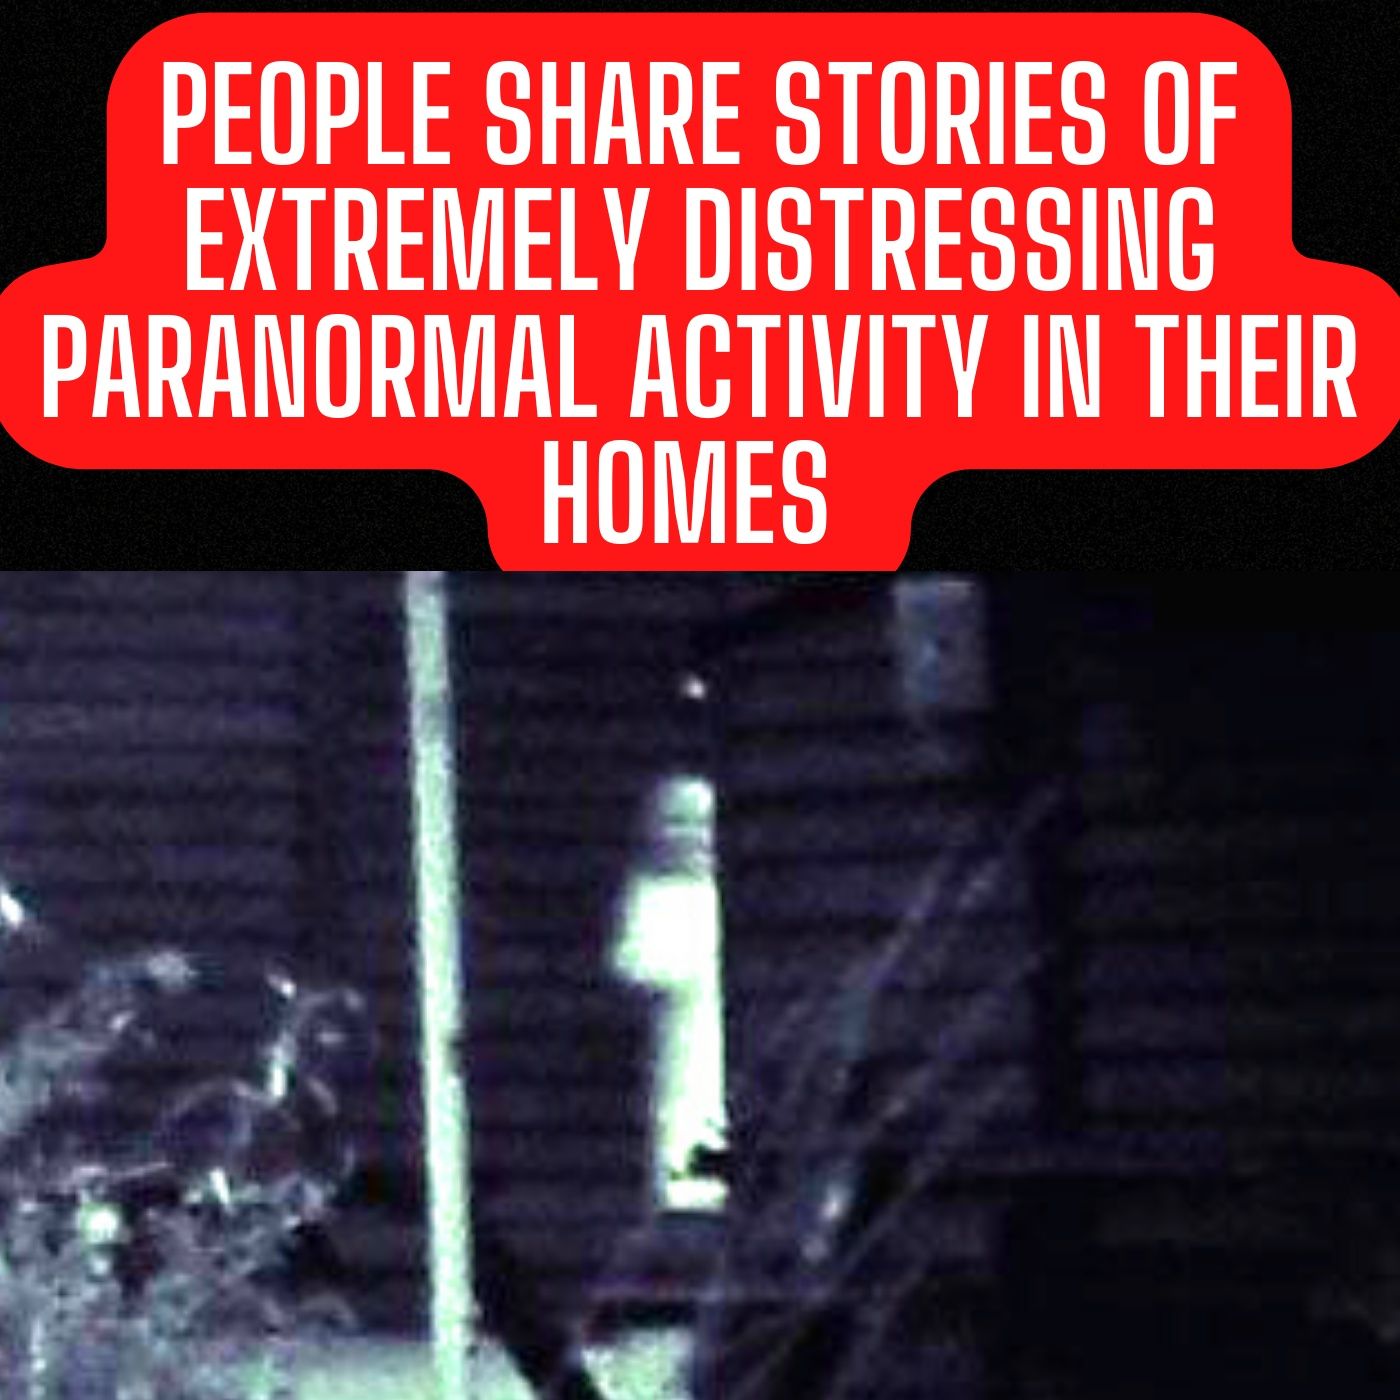 People share TRUE Stories of Extremely Distressing Paranormal Activity in their Homes